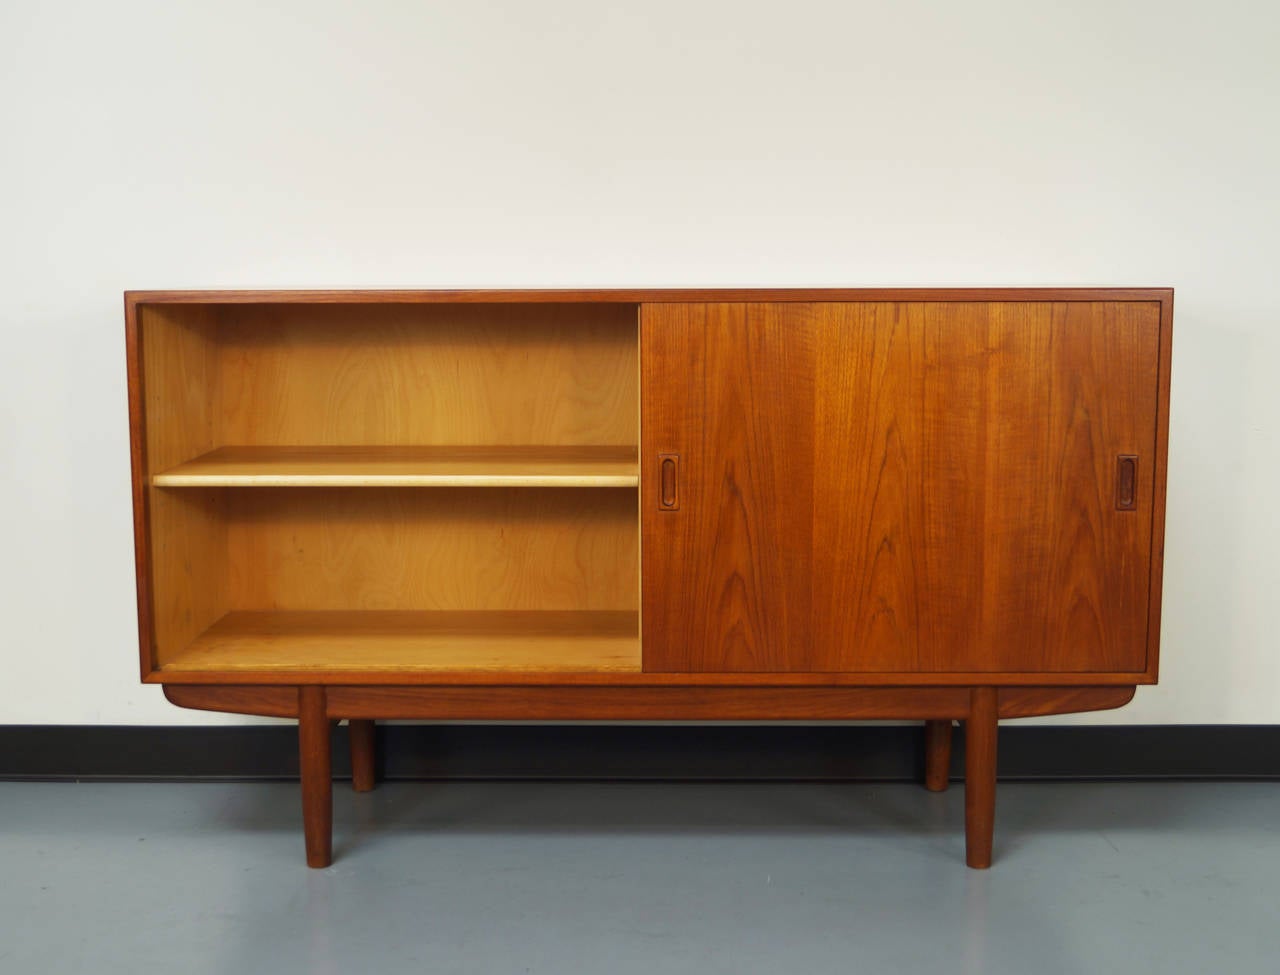 Danish teak credenza designed by Borge Mogensen. Features two large sliding doors which conceals an adjustable shelf and three drawers. Retains original label on the back.